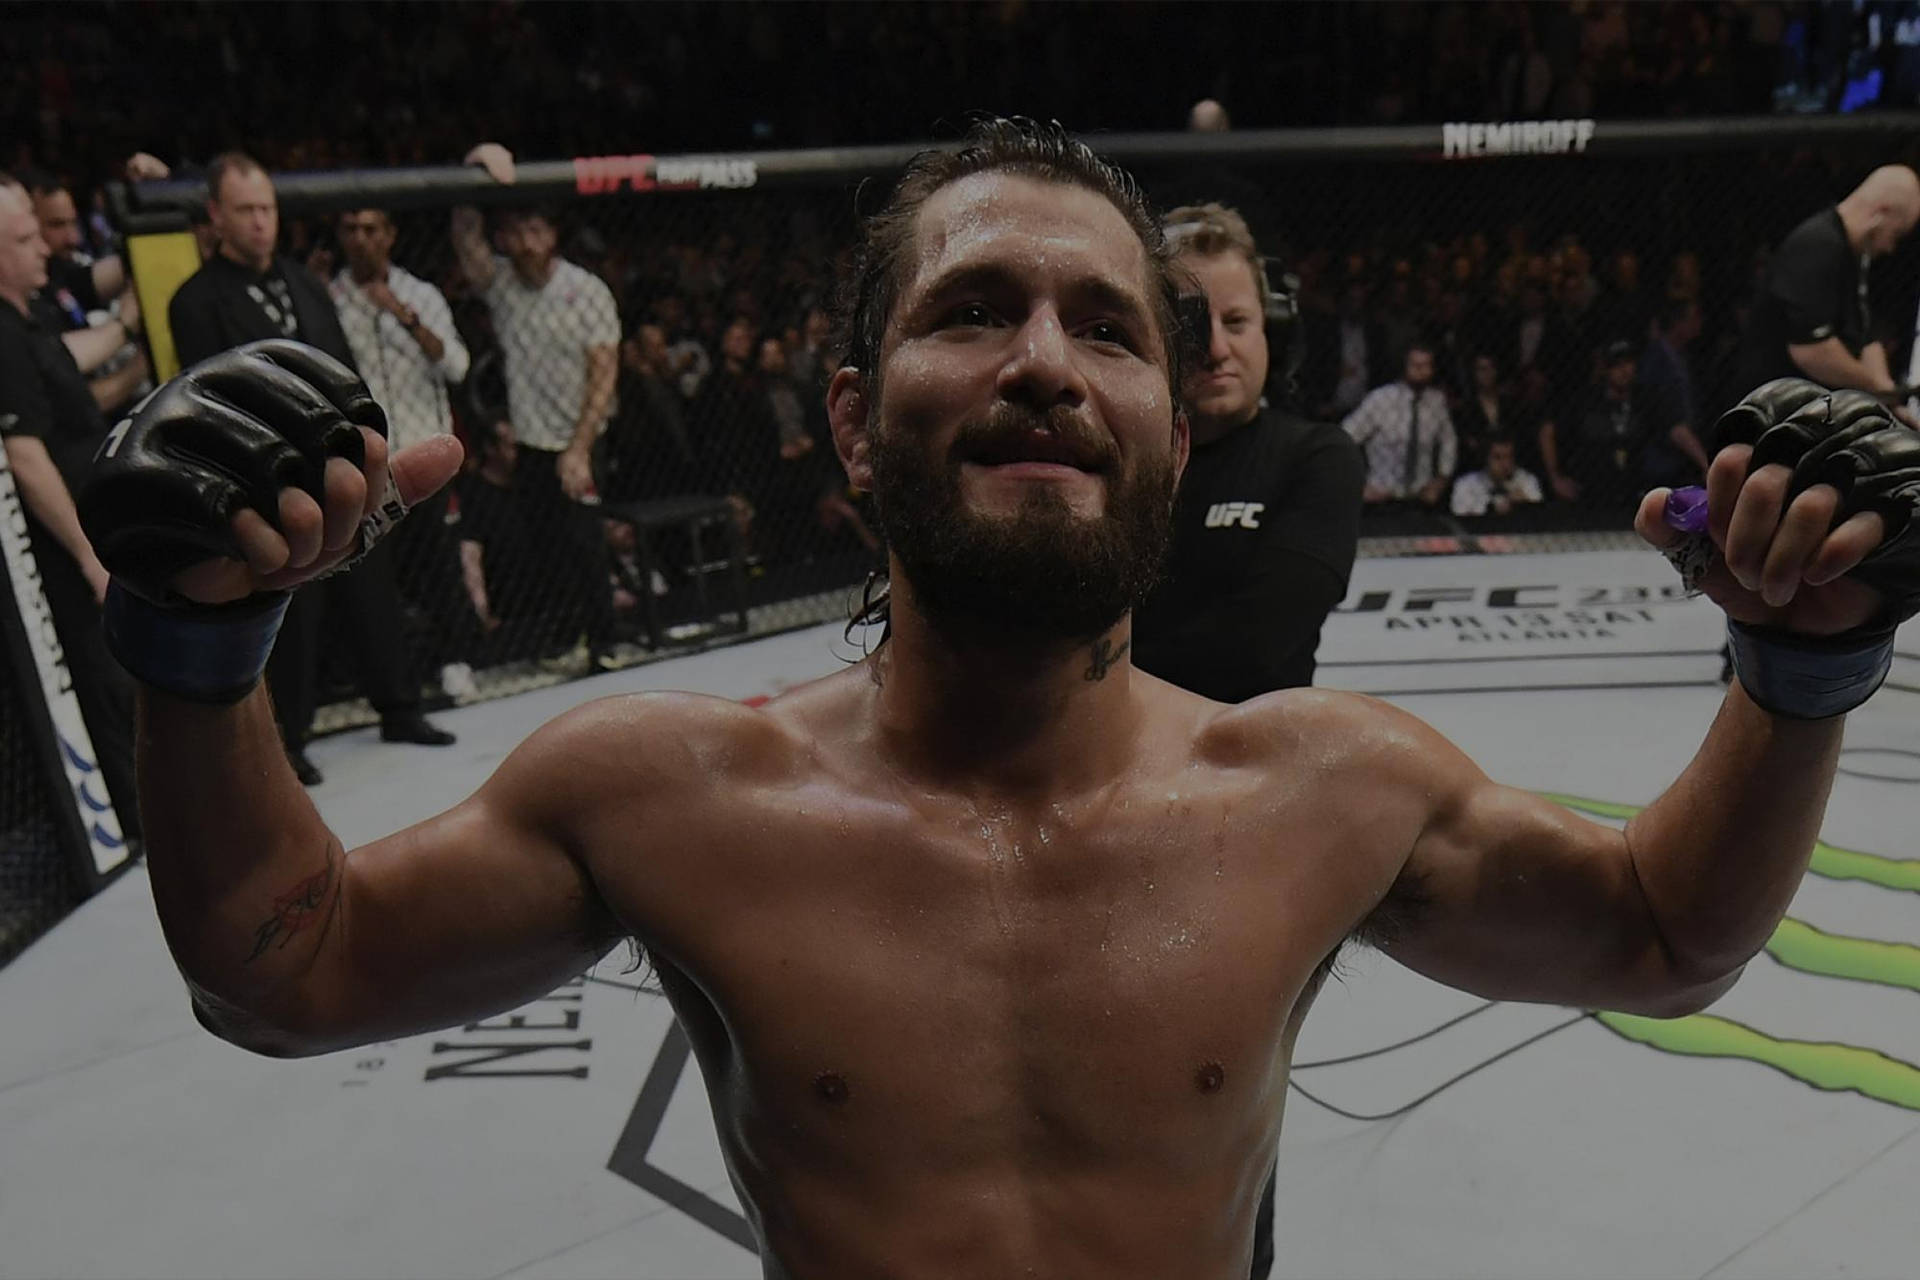 Jorgemasvidal Hands Up - Jorge Masvidal Höjer Händerna (referring To A Computer Or Mobile Wallpaper Featuring A Picture Of Jorge Masvidal With His Hands Up). Wallpaper